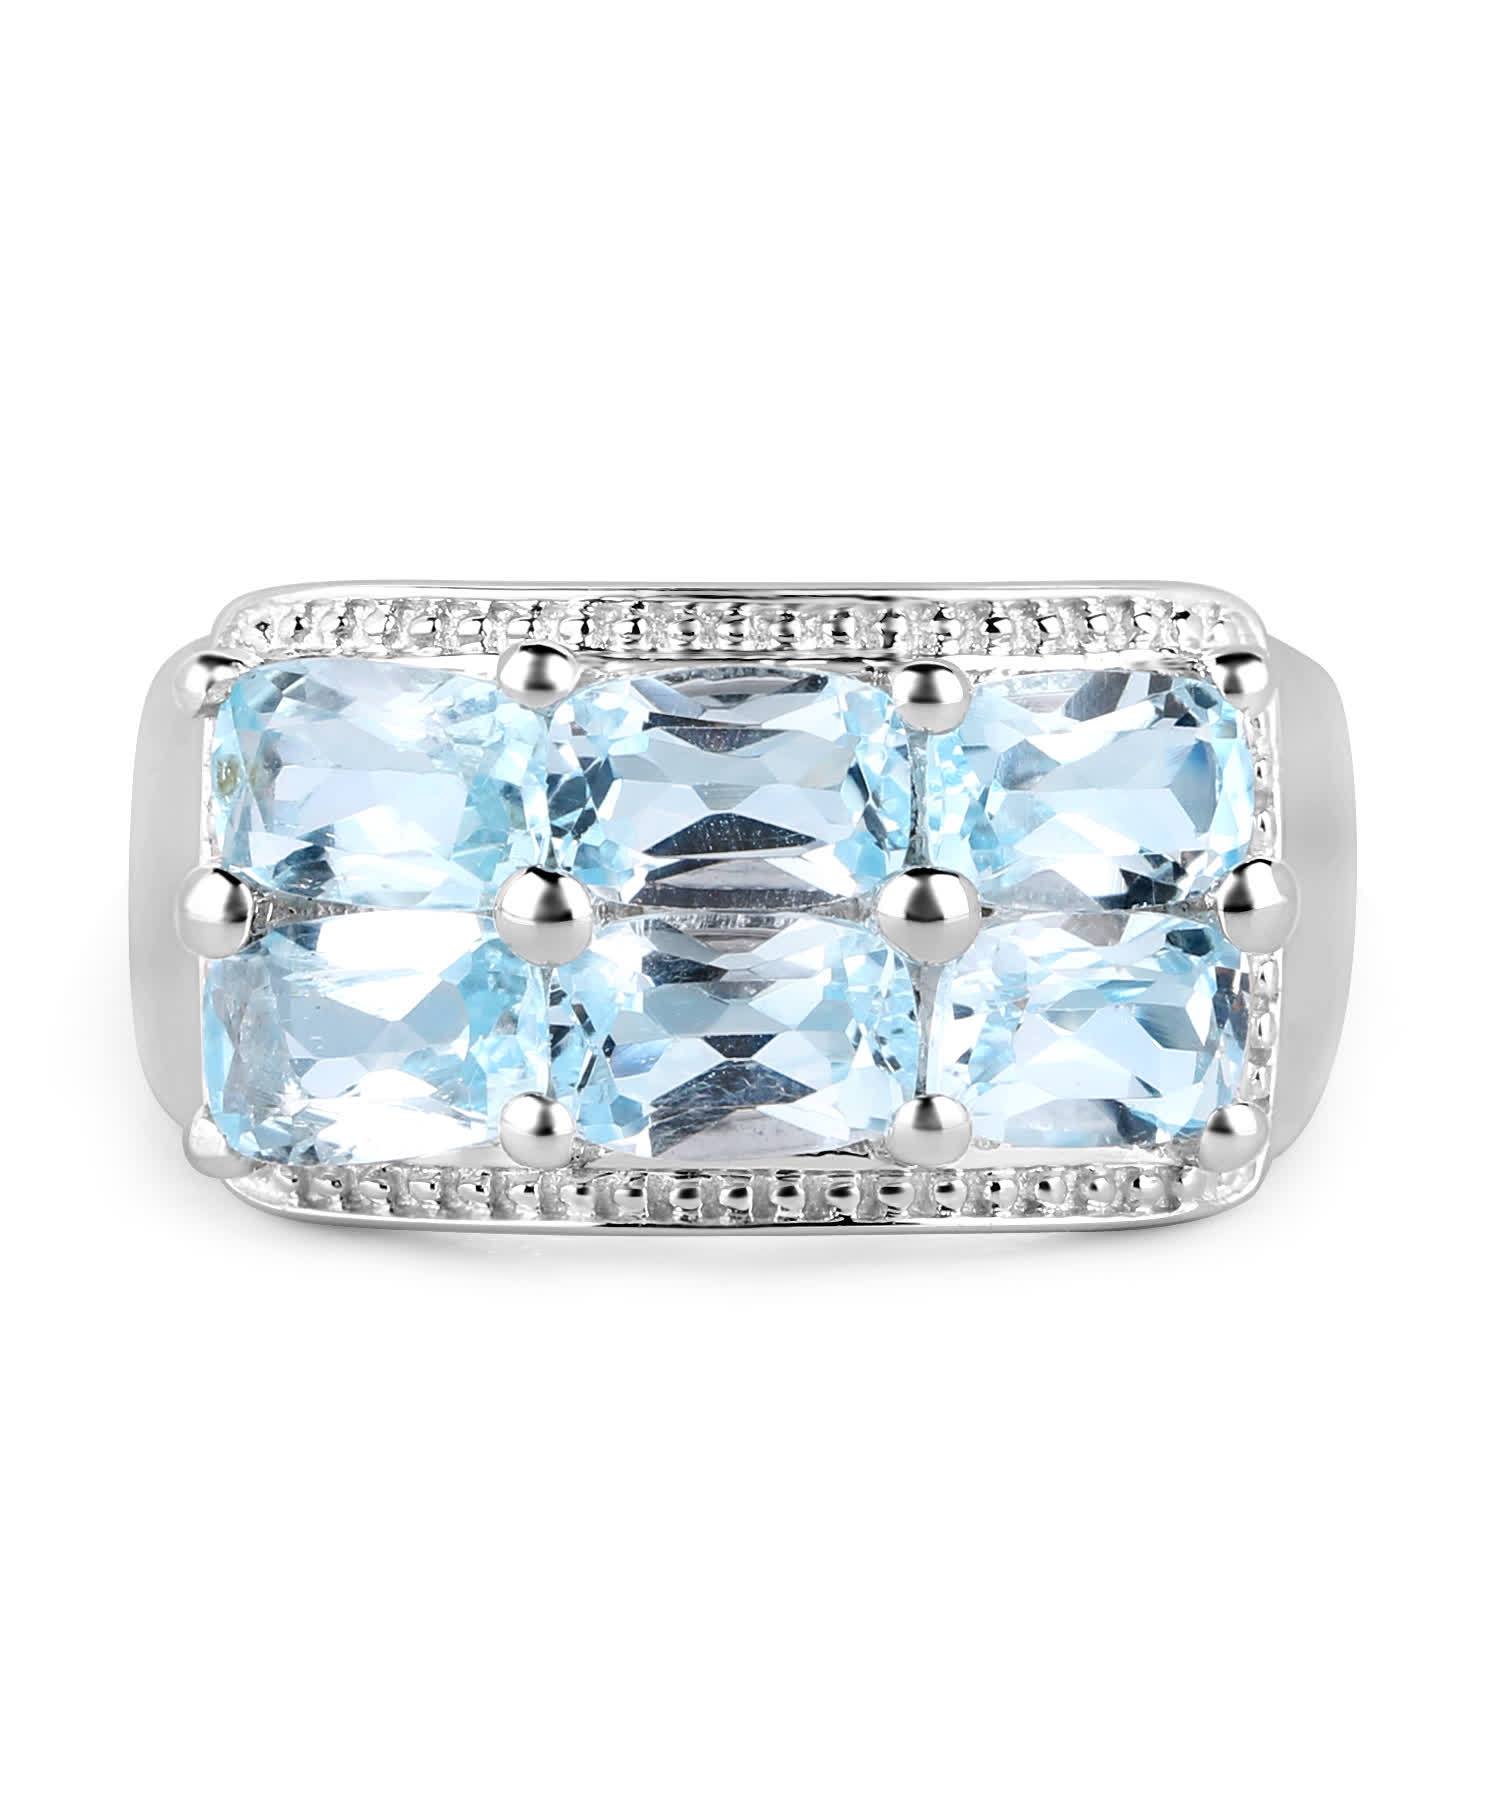 3.60ctw Natural Sky Blue Topaz Rhodium Plated Silver Cocktail Ring View 3